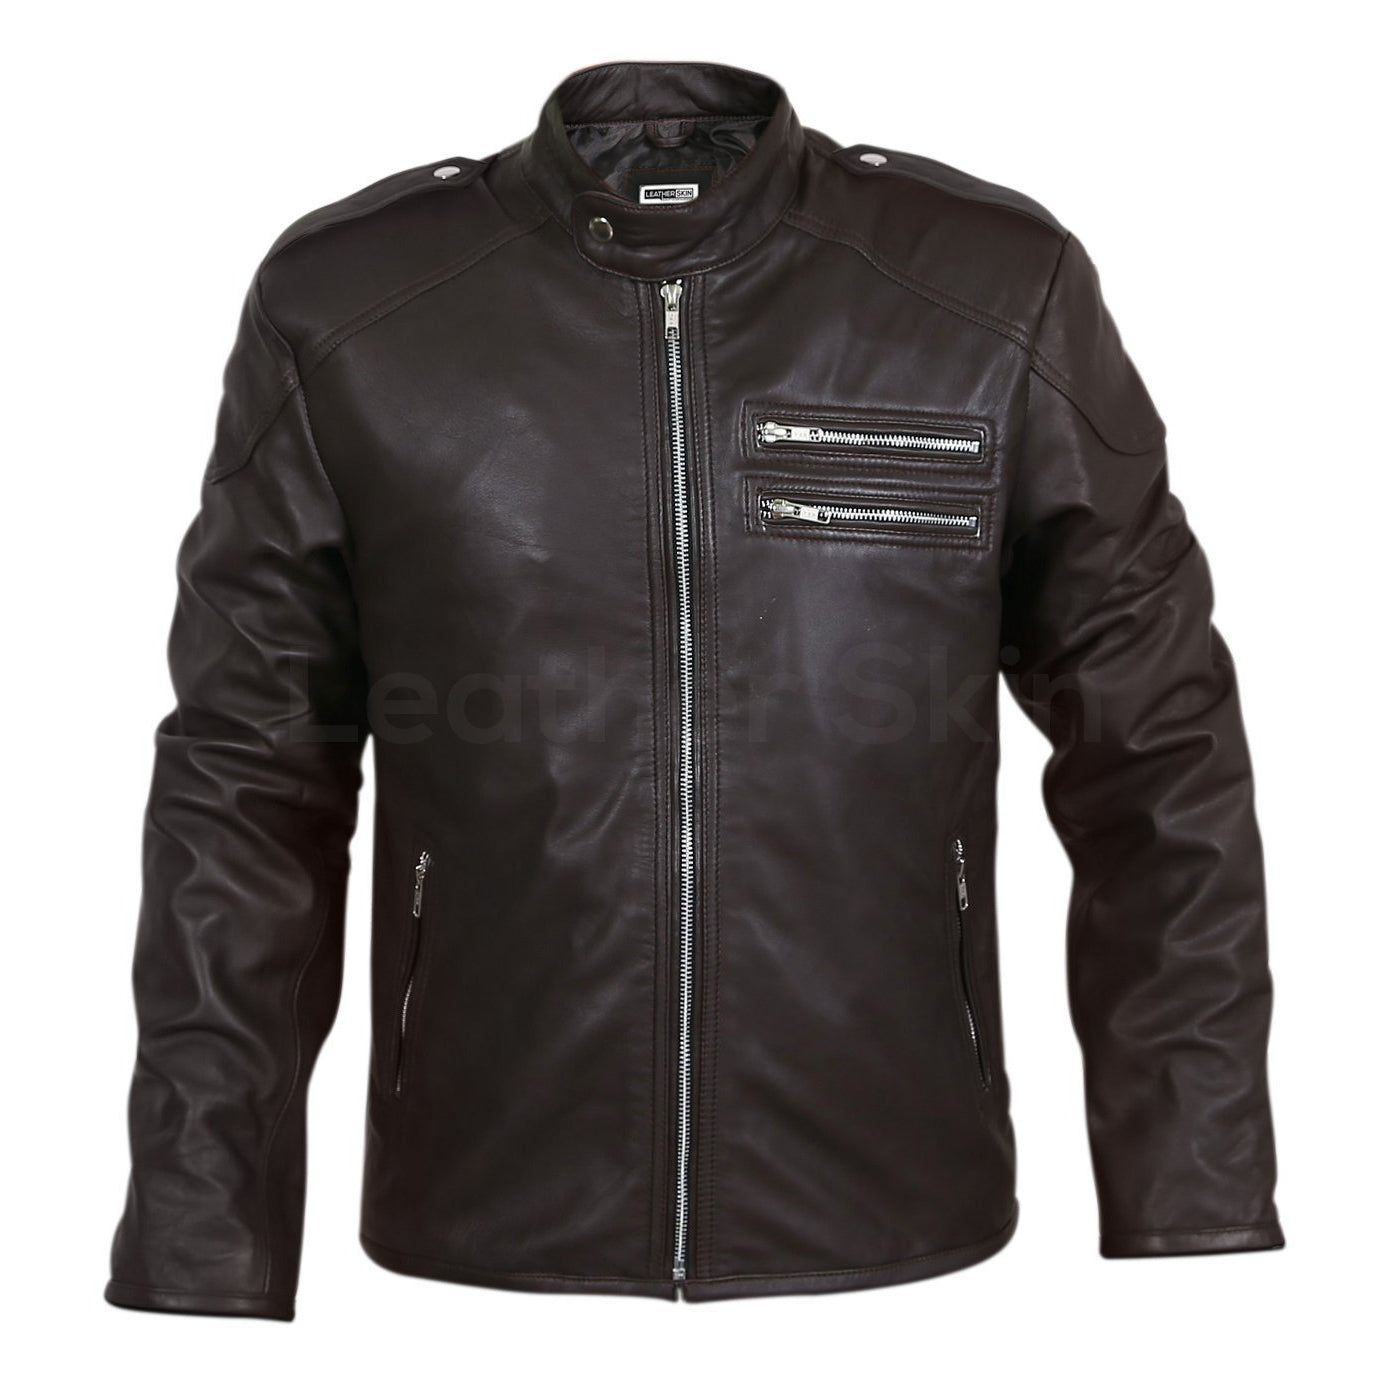 Buy SKY LINE OCEAN ORIGINAL LEATHER JACKET (100% PURE LEATHER) FOR MEN Pure  BLACK at Amazon.in